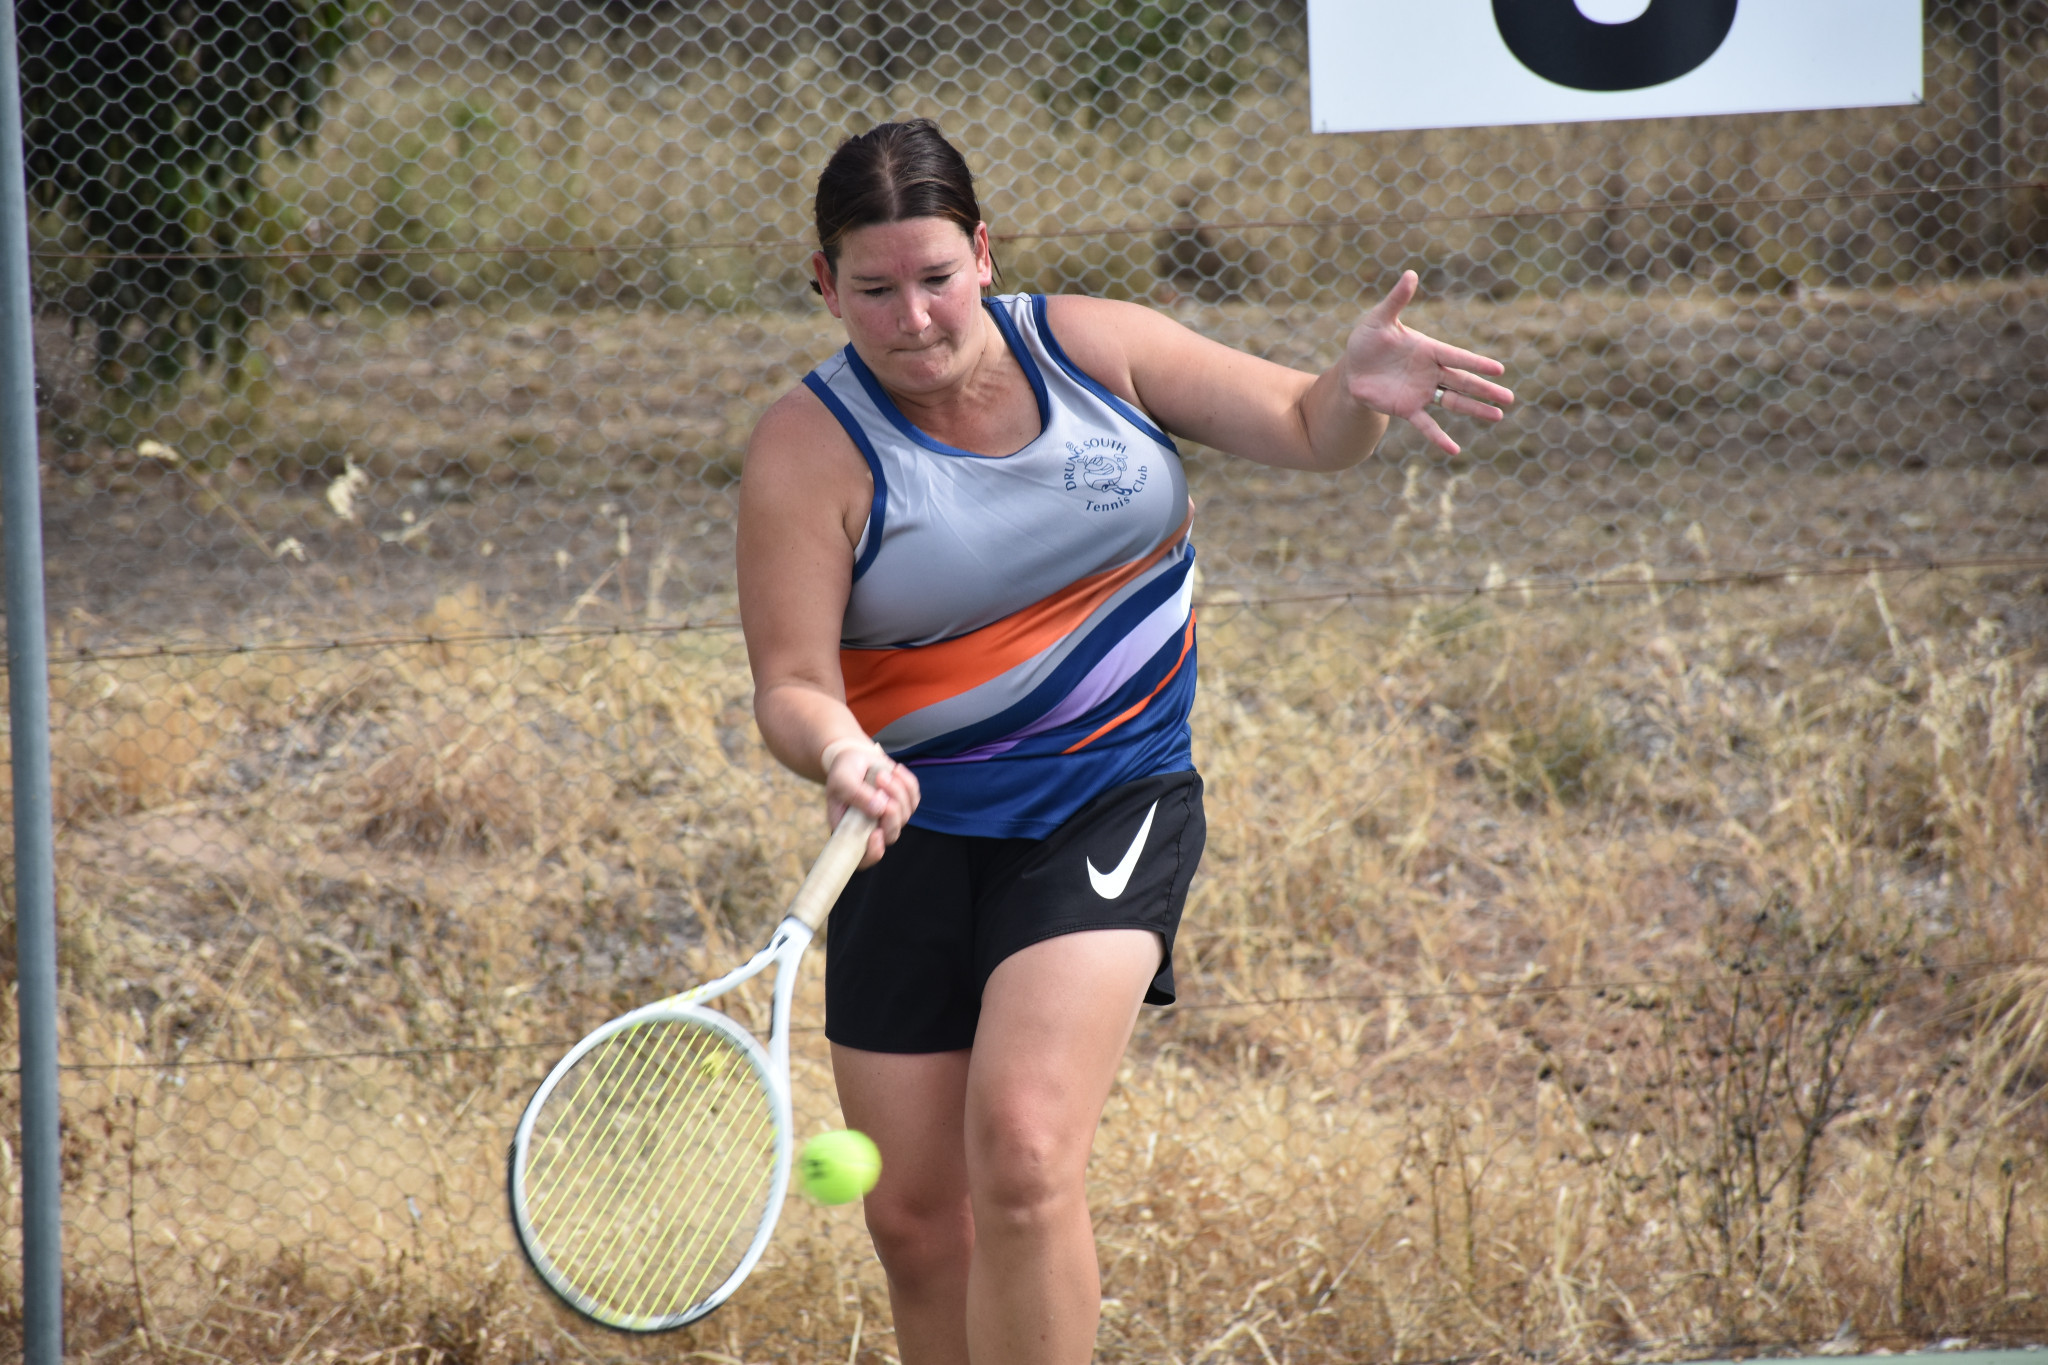 Kate-Lyn Perkin played through injury on Saturday against Central Park. She watches the ball carefully as she returns in her match with Willow Sainsbury. She ended up losing the tight set 8-7.